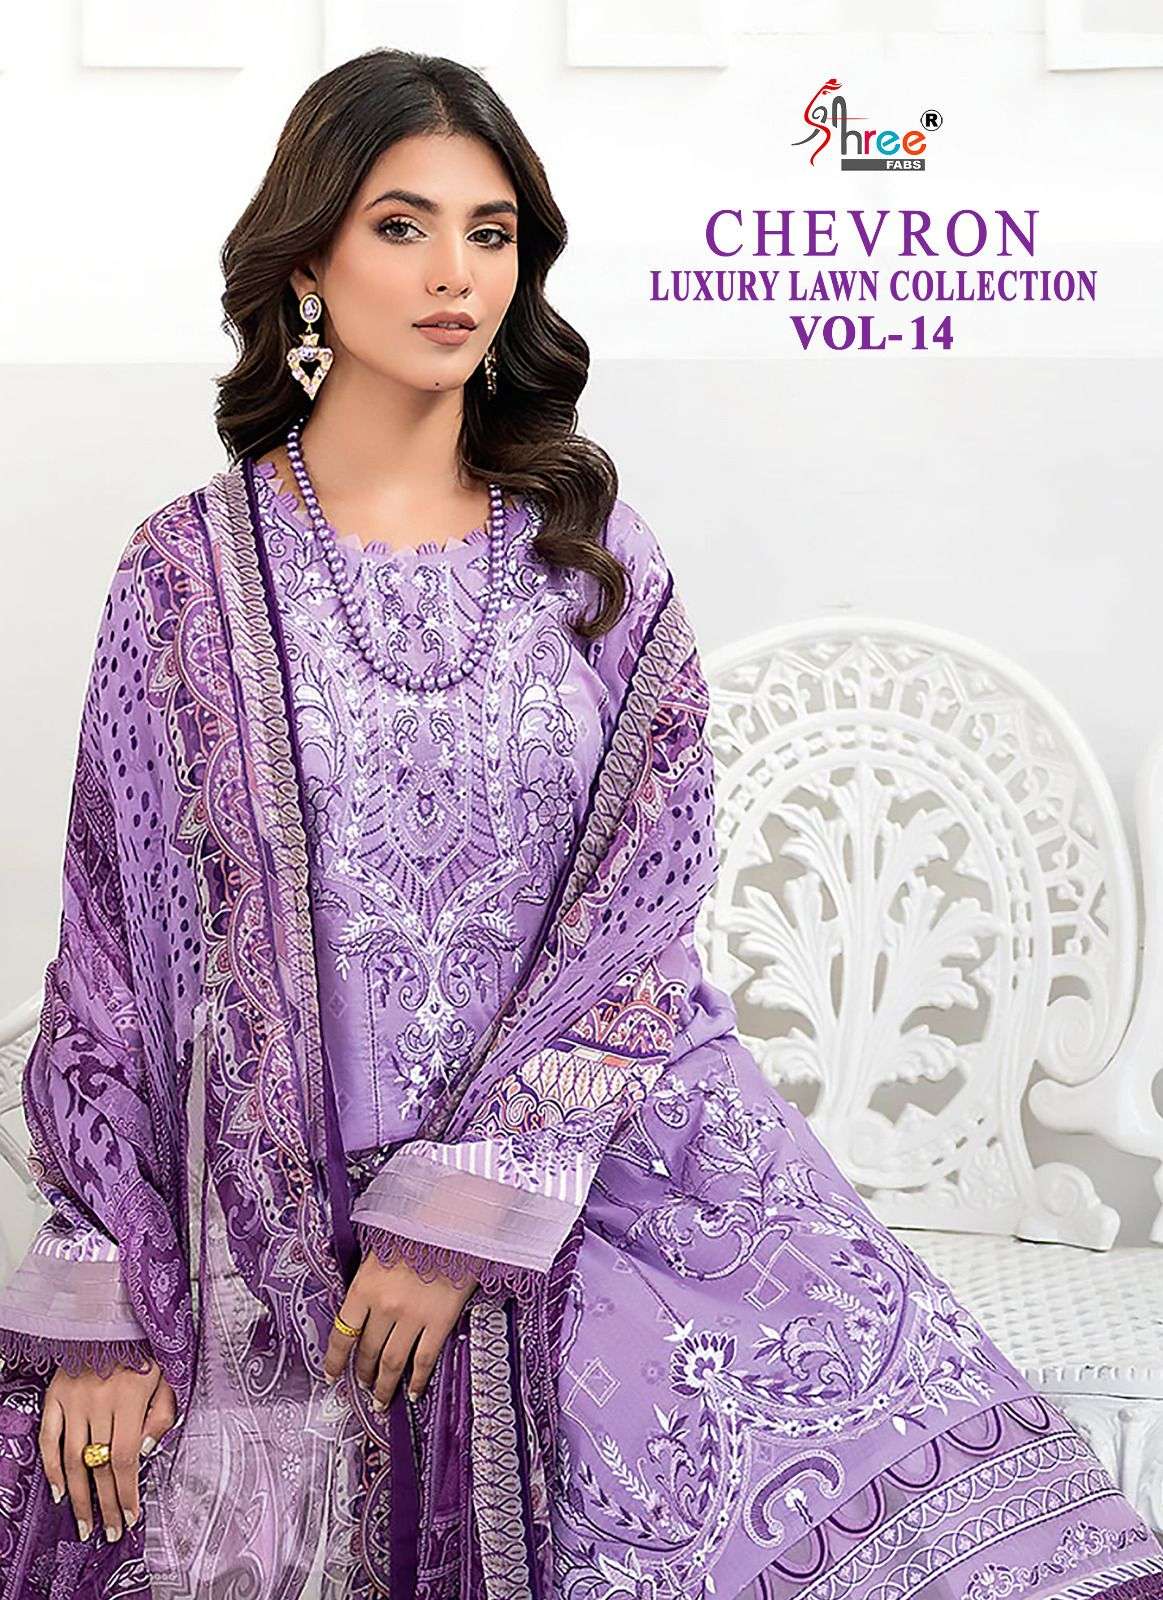 SHREE FABS CHEVRON LUXURY LAWN COLLECTION VOL 14 LAWN COTTON PRINT WITH  EMBROIDERED SALWAR KAMEEZ WHOLESALER 